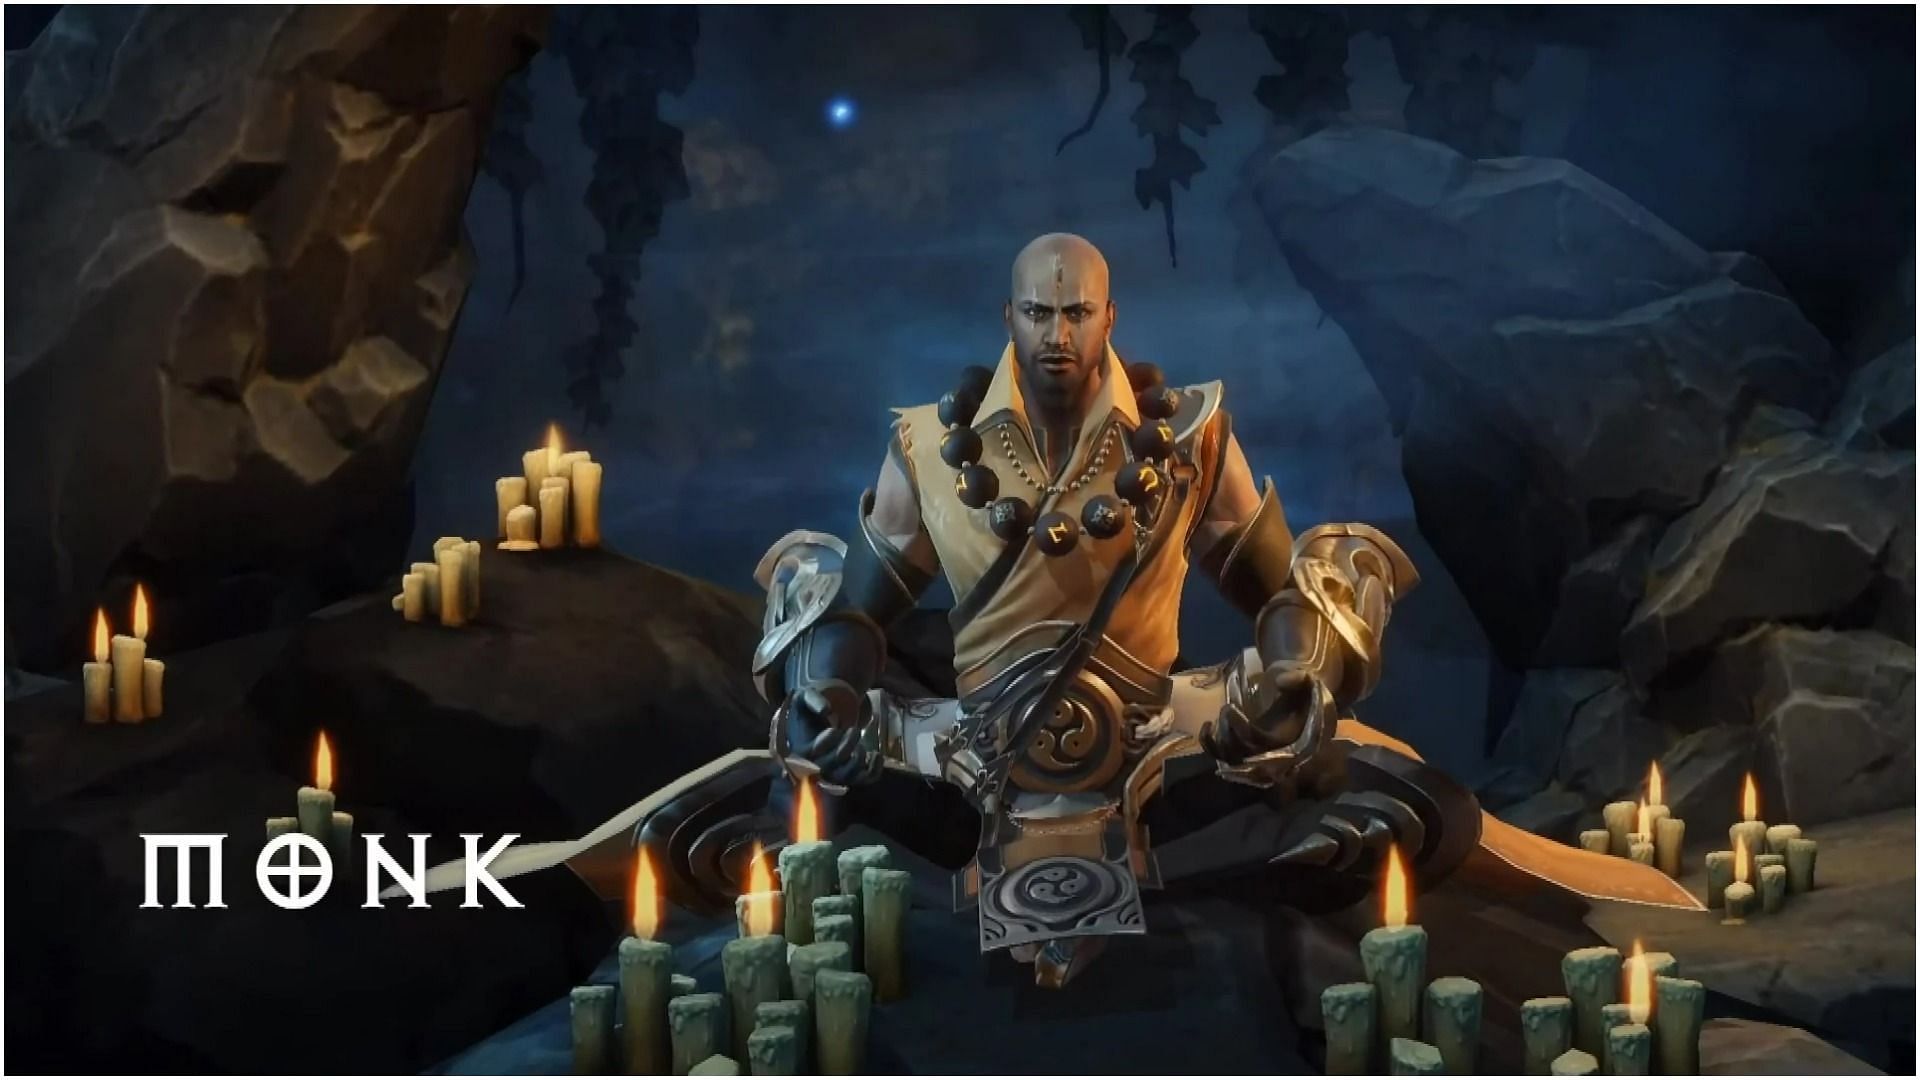 The bare-handed style of the Monks is not to be underestimated in Diablo Immortal (Image via Activision Blizzard)